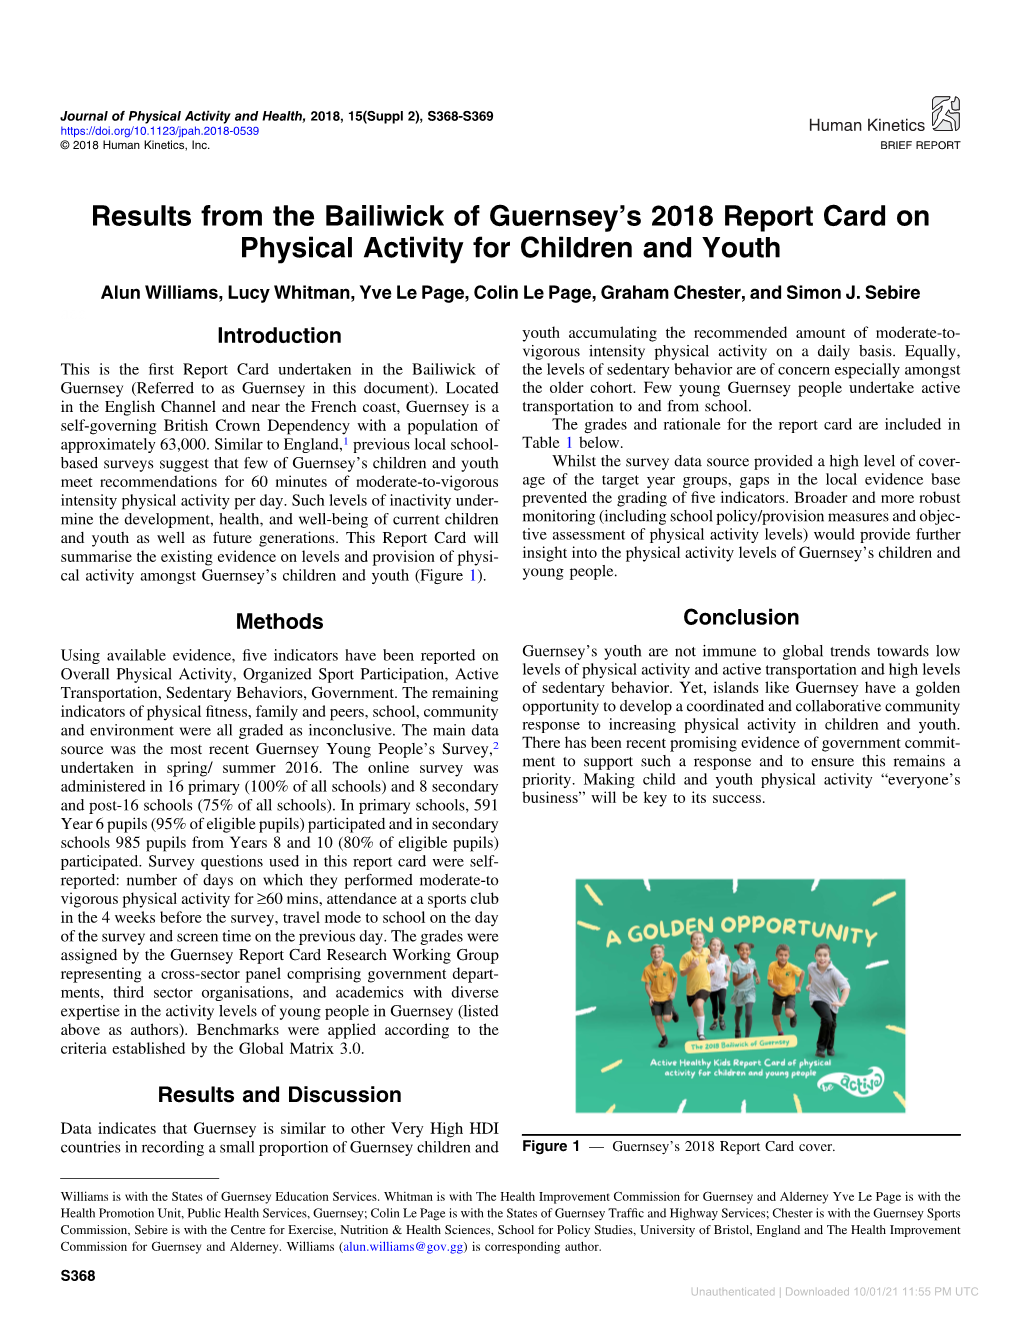 Results from the Bailiwick of Guernsey's 2018 Report Card On